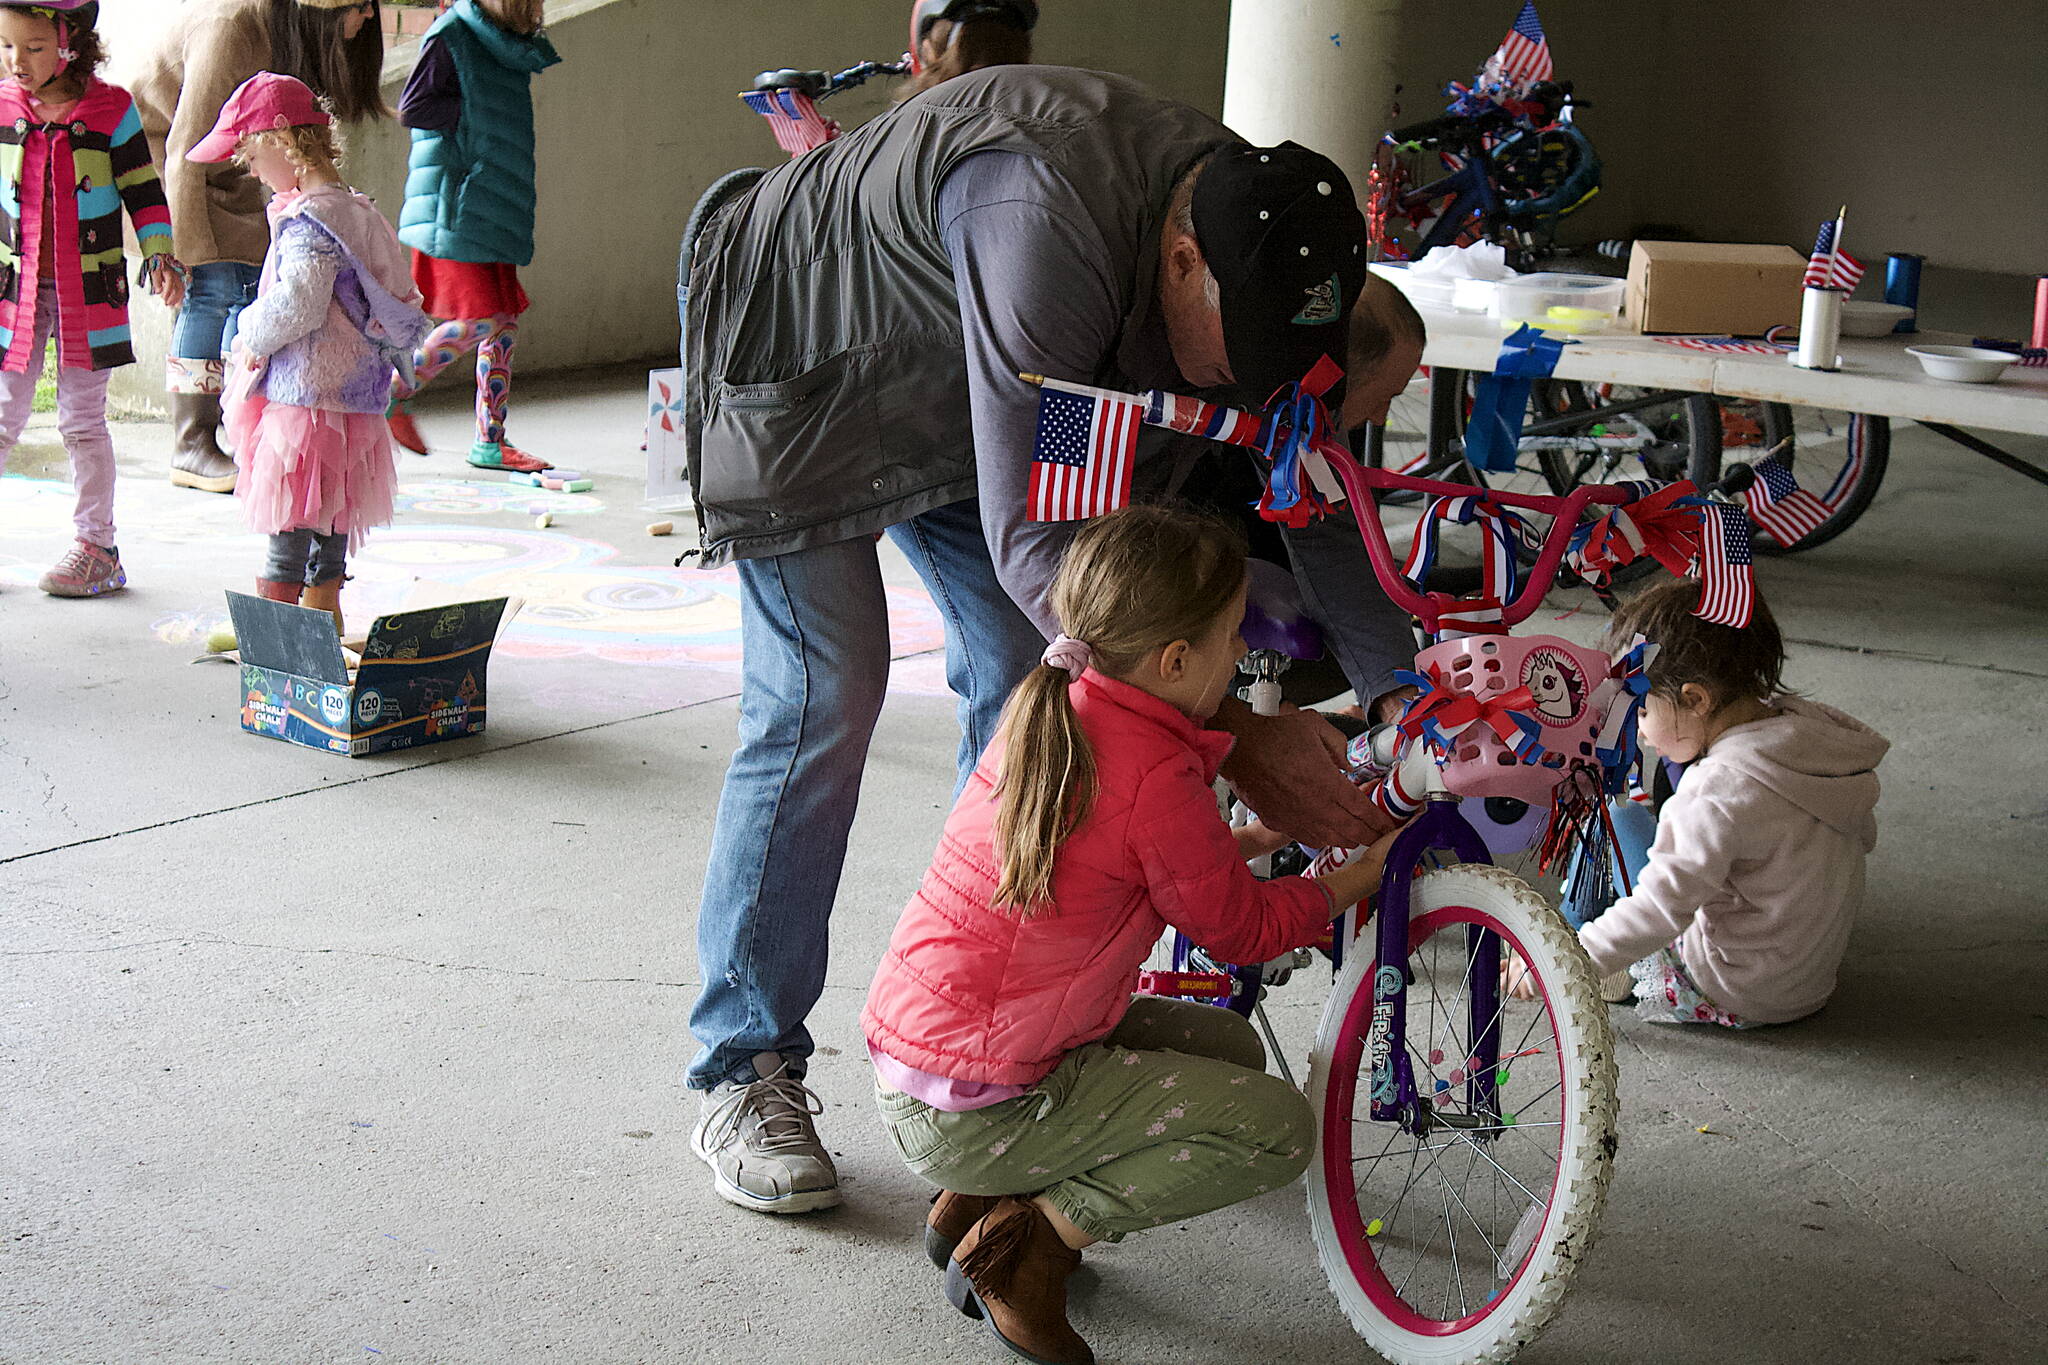 Jim Dalman and his granddaughter Devlin, 6, decorate a bicycle in the Douglas Library parking garage Saturday during the annual pre-July 4 gathering to prepare for the Children’s Parade on Independence Day. (Therese Pokorney / Juneau Empire)